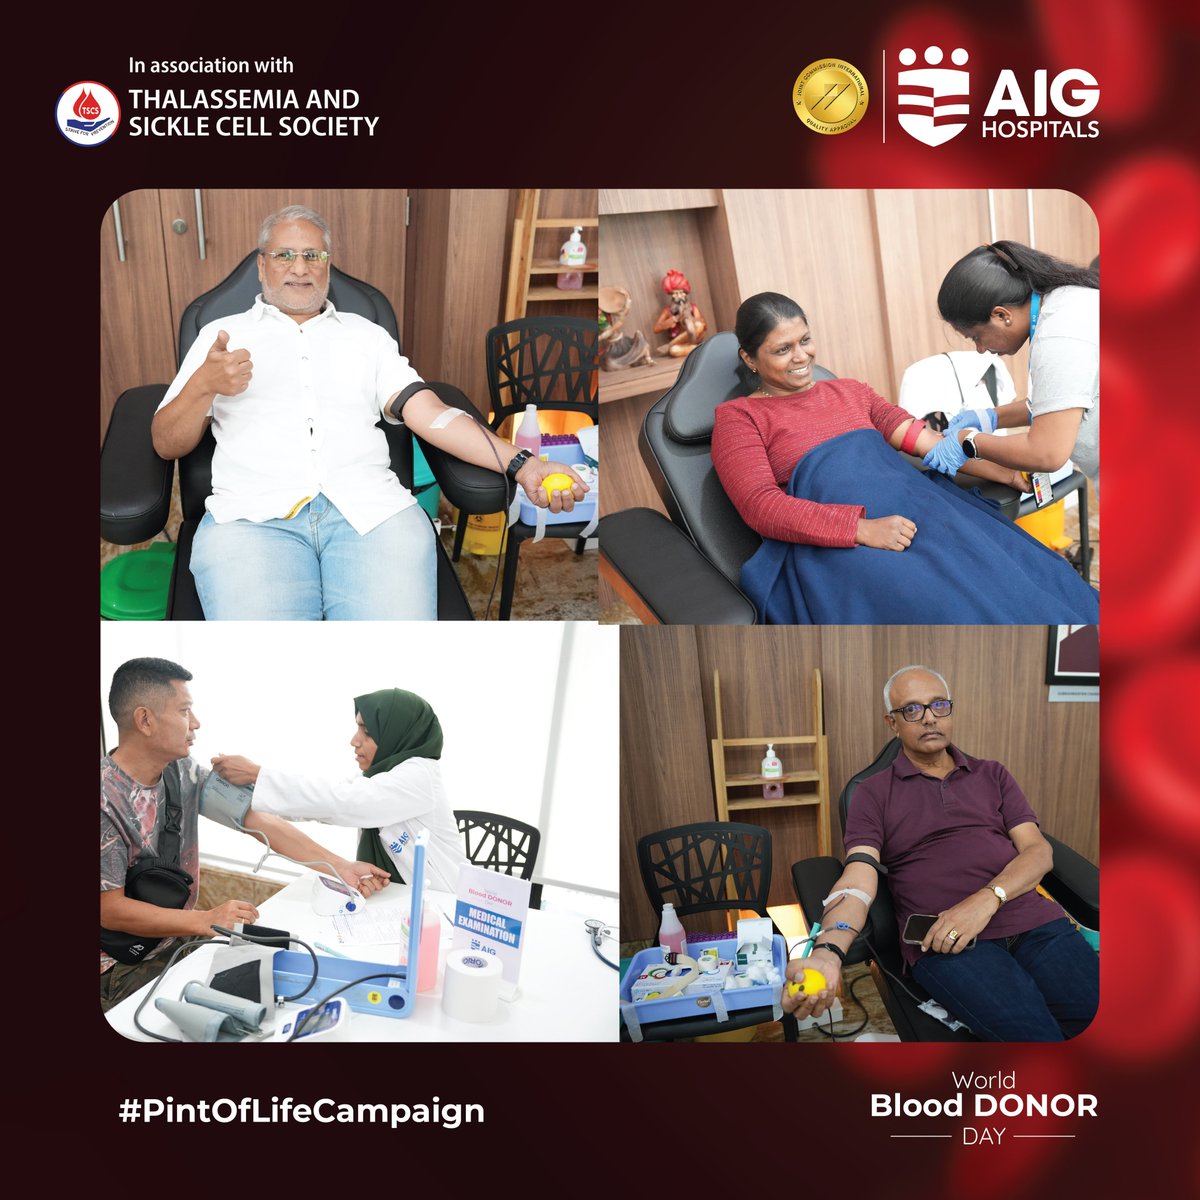 It was an overwhelming day for all of us at AIG Hospitals, where humanity came together for our #PintOfLife campaign, generously donating blood to help #Thalassemia and #SickleCellAnemia patients. World Blood Donor Day celebrated in its right spirit. We thank all our volunteers